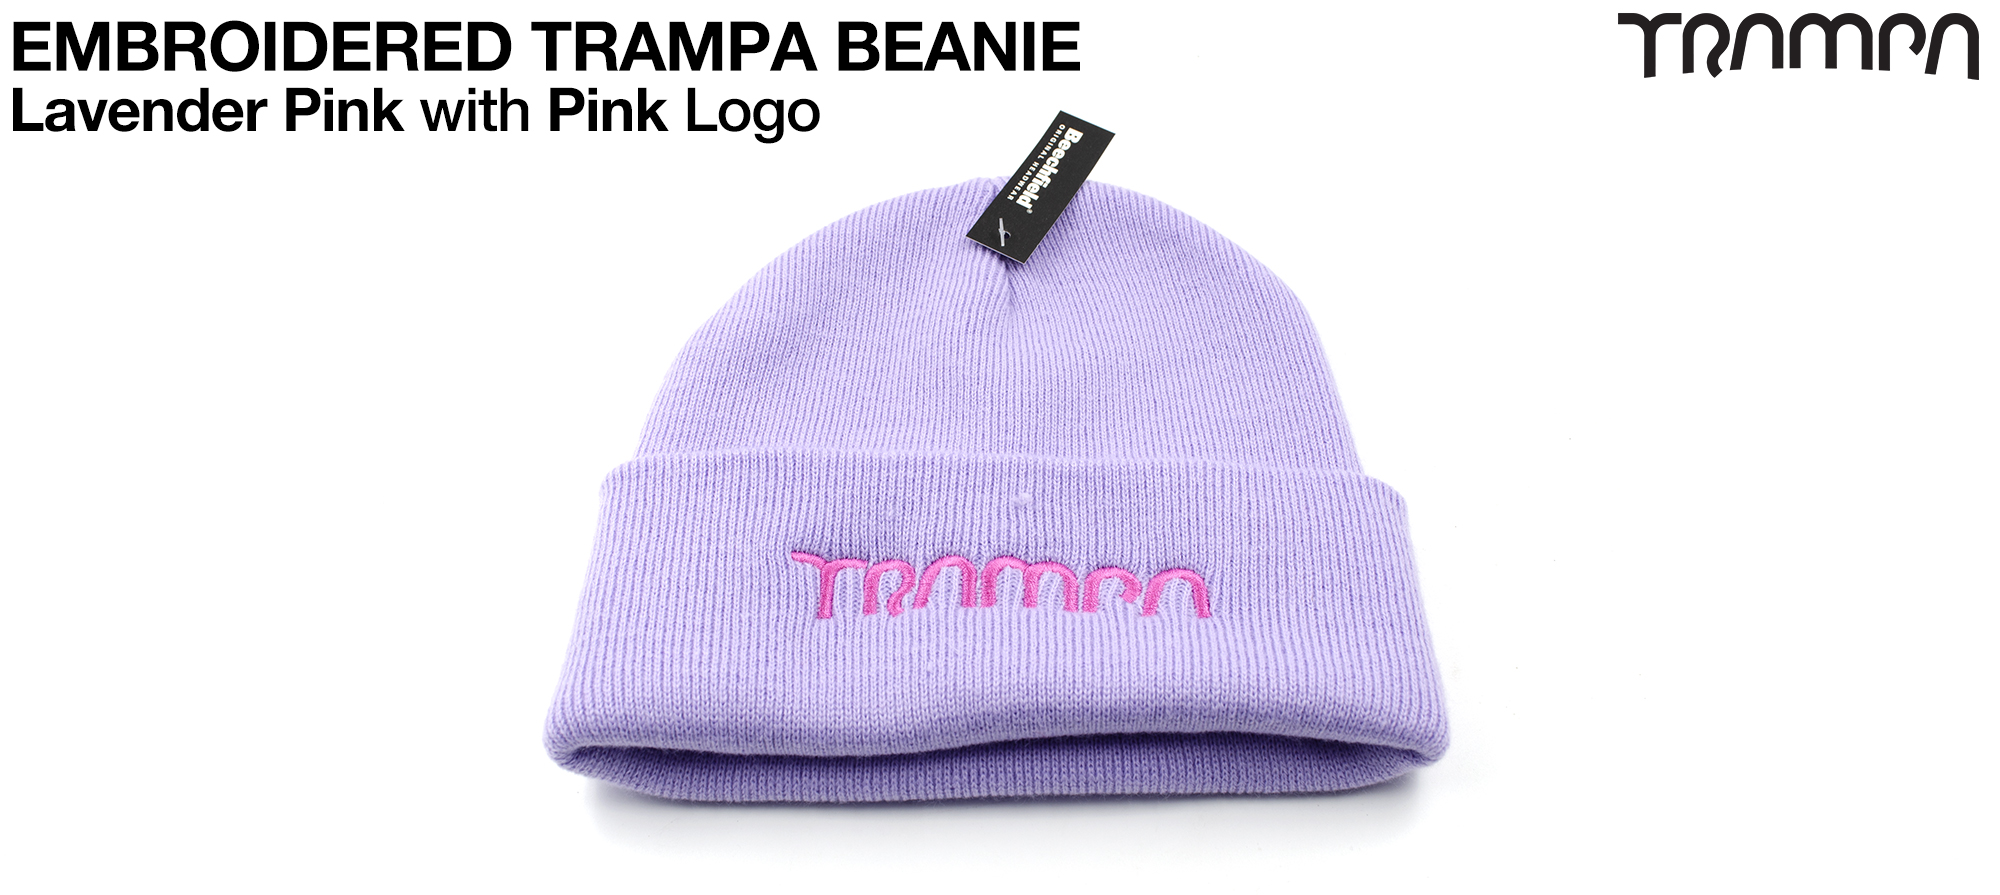 Lavender PINK Woolly hat with PINK TRAMPA logo